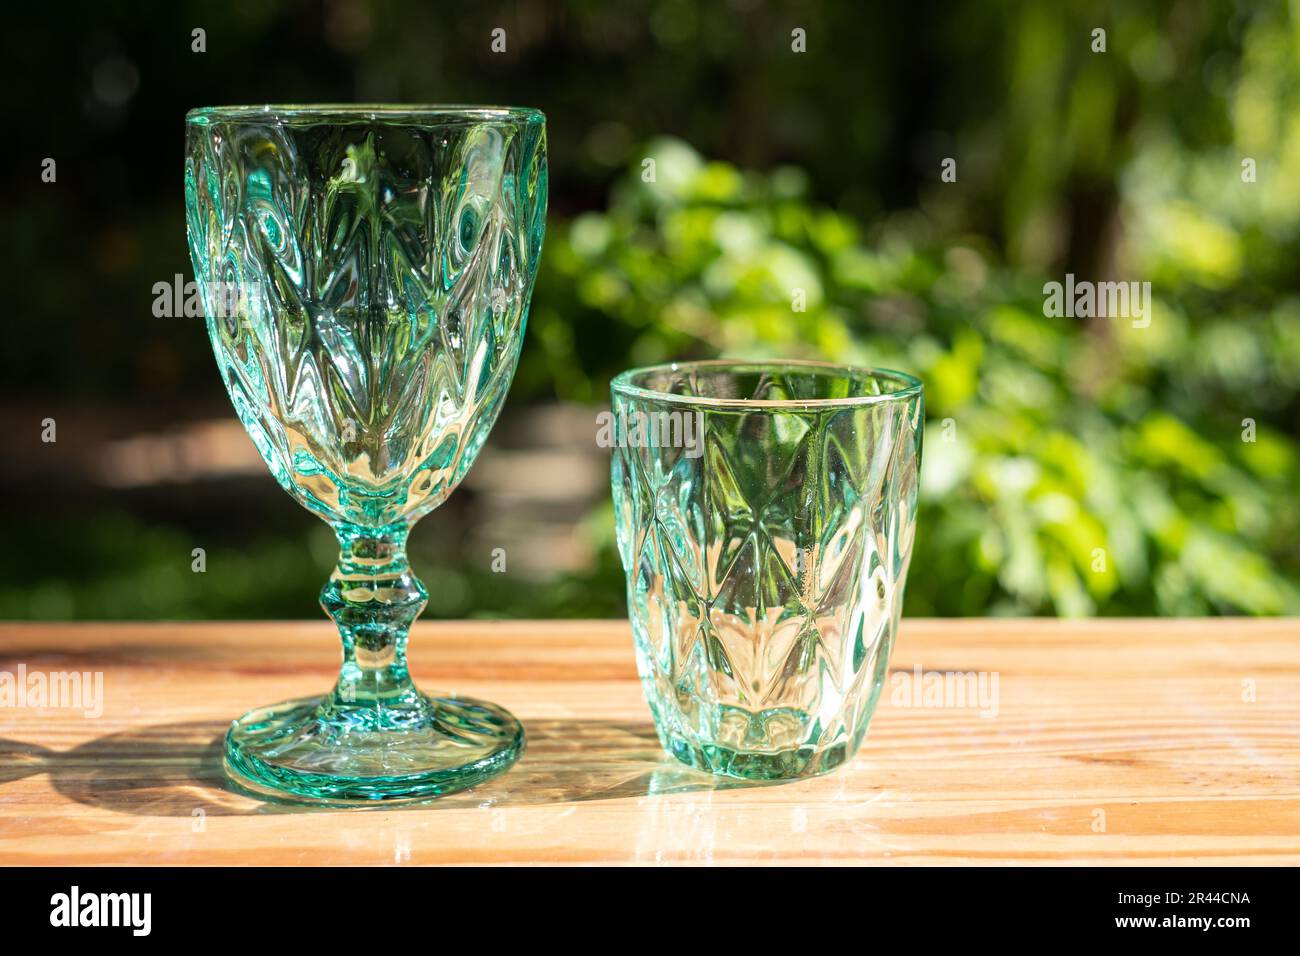 Uranium glass or Sapphire Crystal glass. Green tint color glassware vintage classic design old kitchenware on wooden table outdoor sunny light reflect Stock Photo